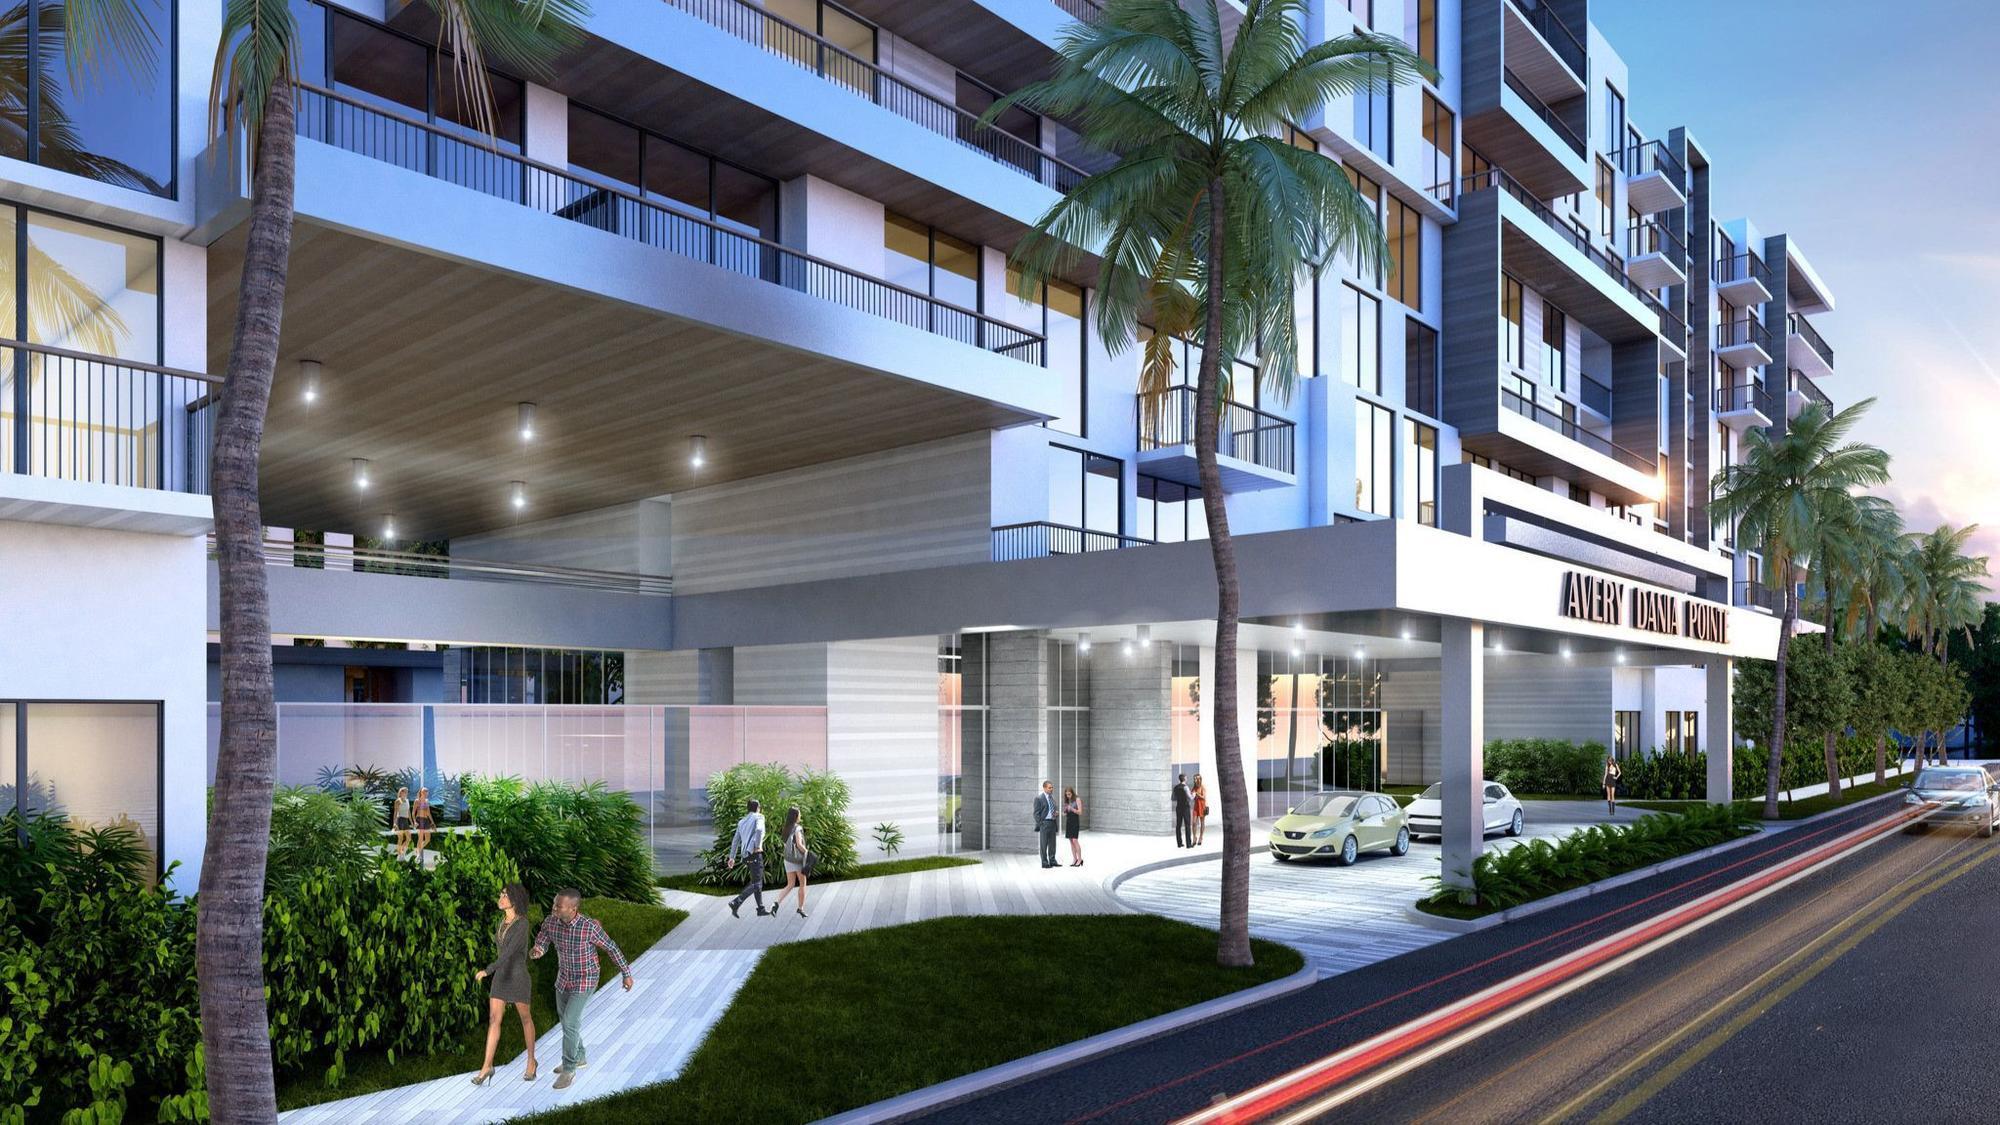 Dania Pointe to offer 600 apartments starting at $1,600 a month, as